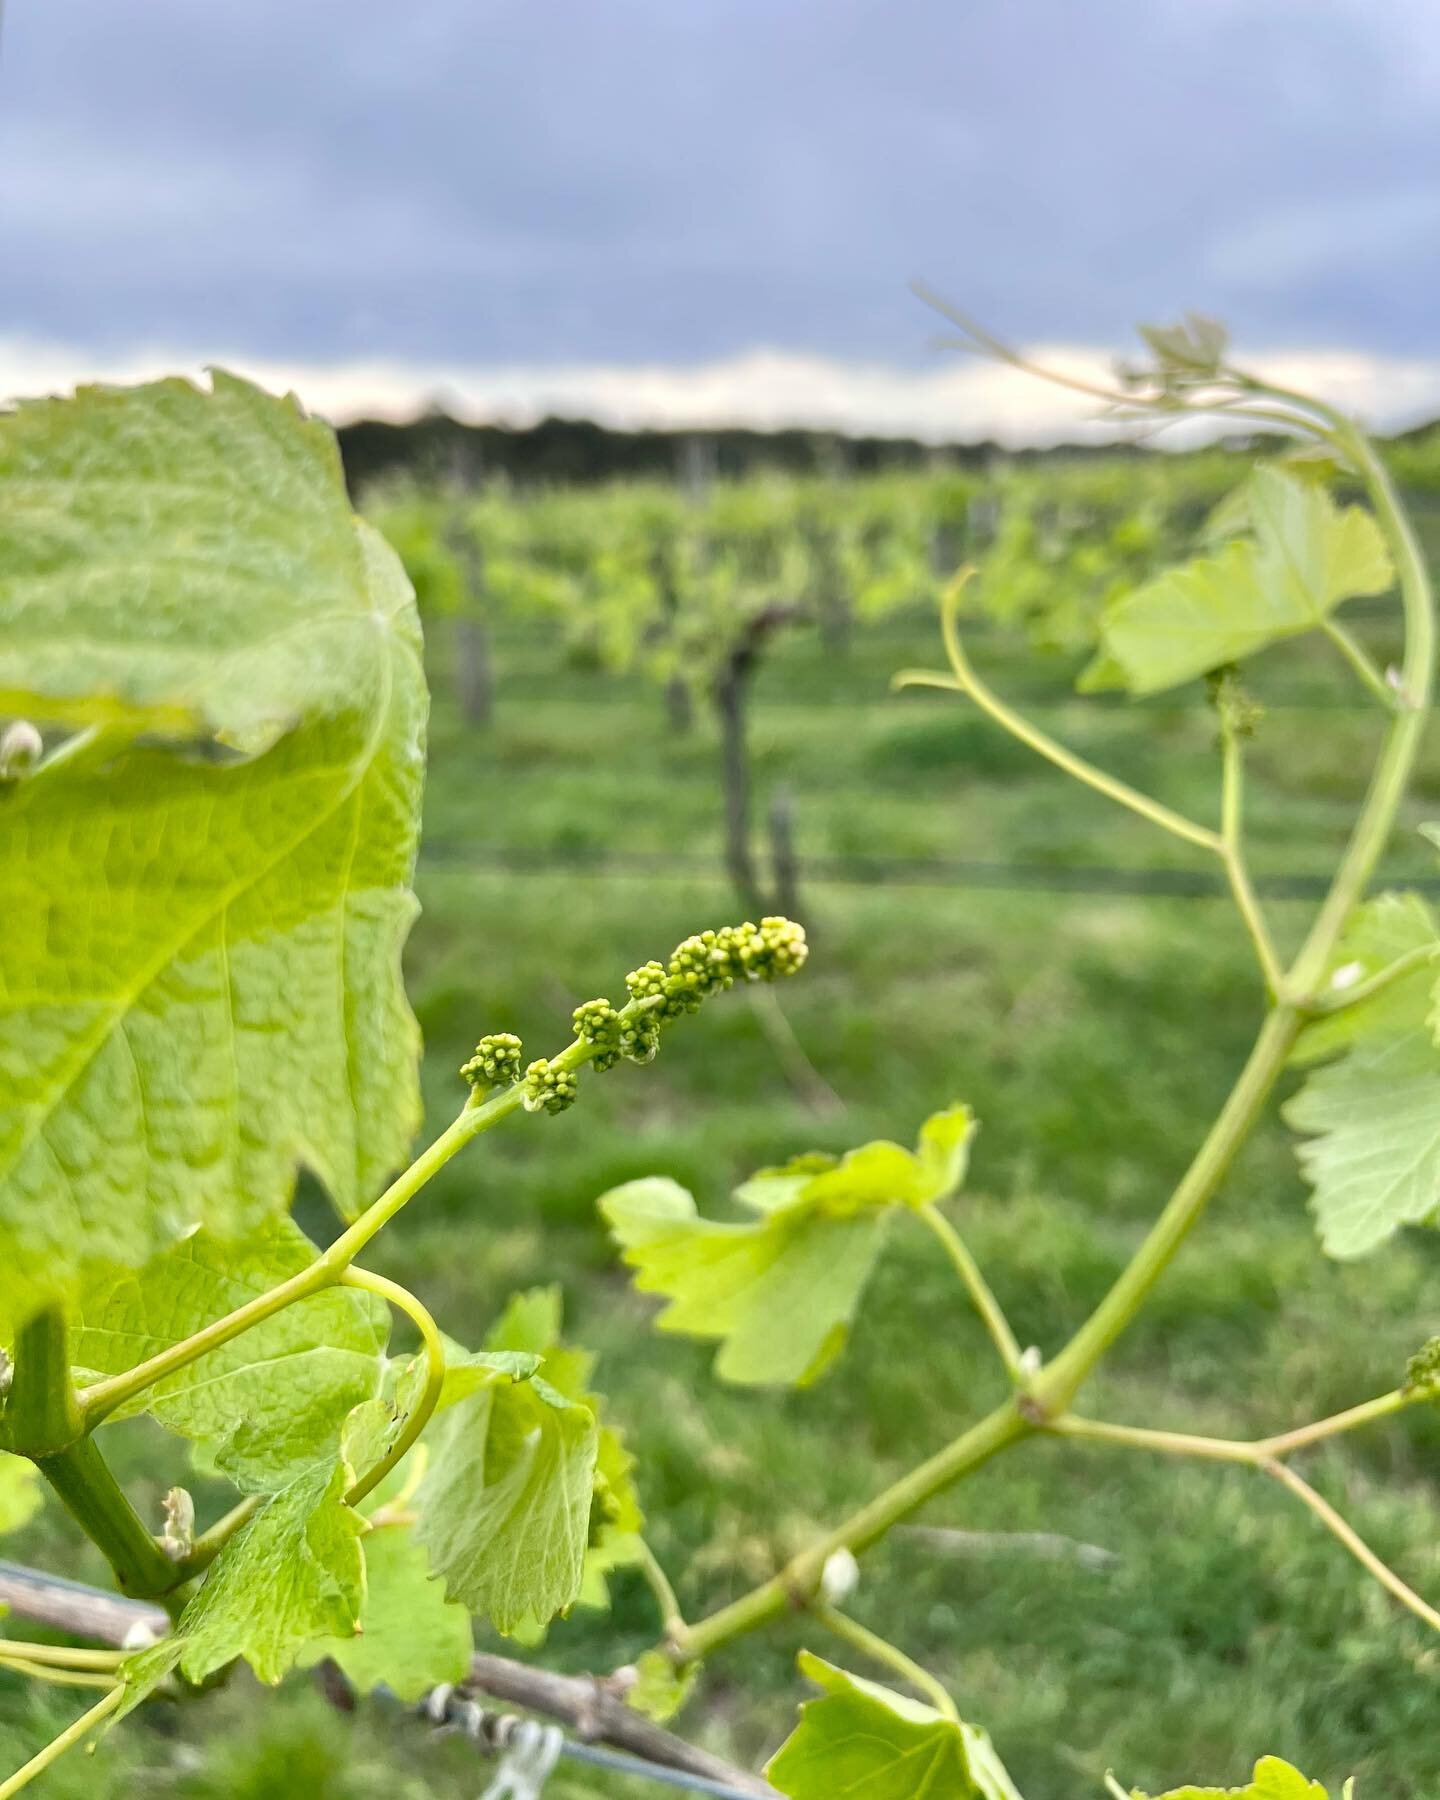 Here they are, the little beauties! 🍇 or so you might think but while these look like mini-grape bunches, they are actually the calyptra, or caps that cover tiny flowers-in-the-making&hellip; nevertheless, this is the start of vintage 2024! Very soo